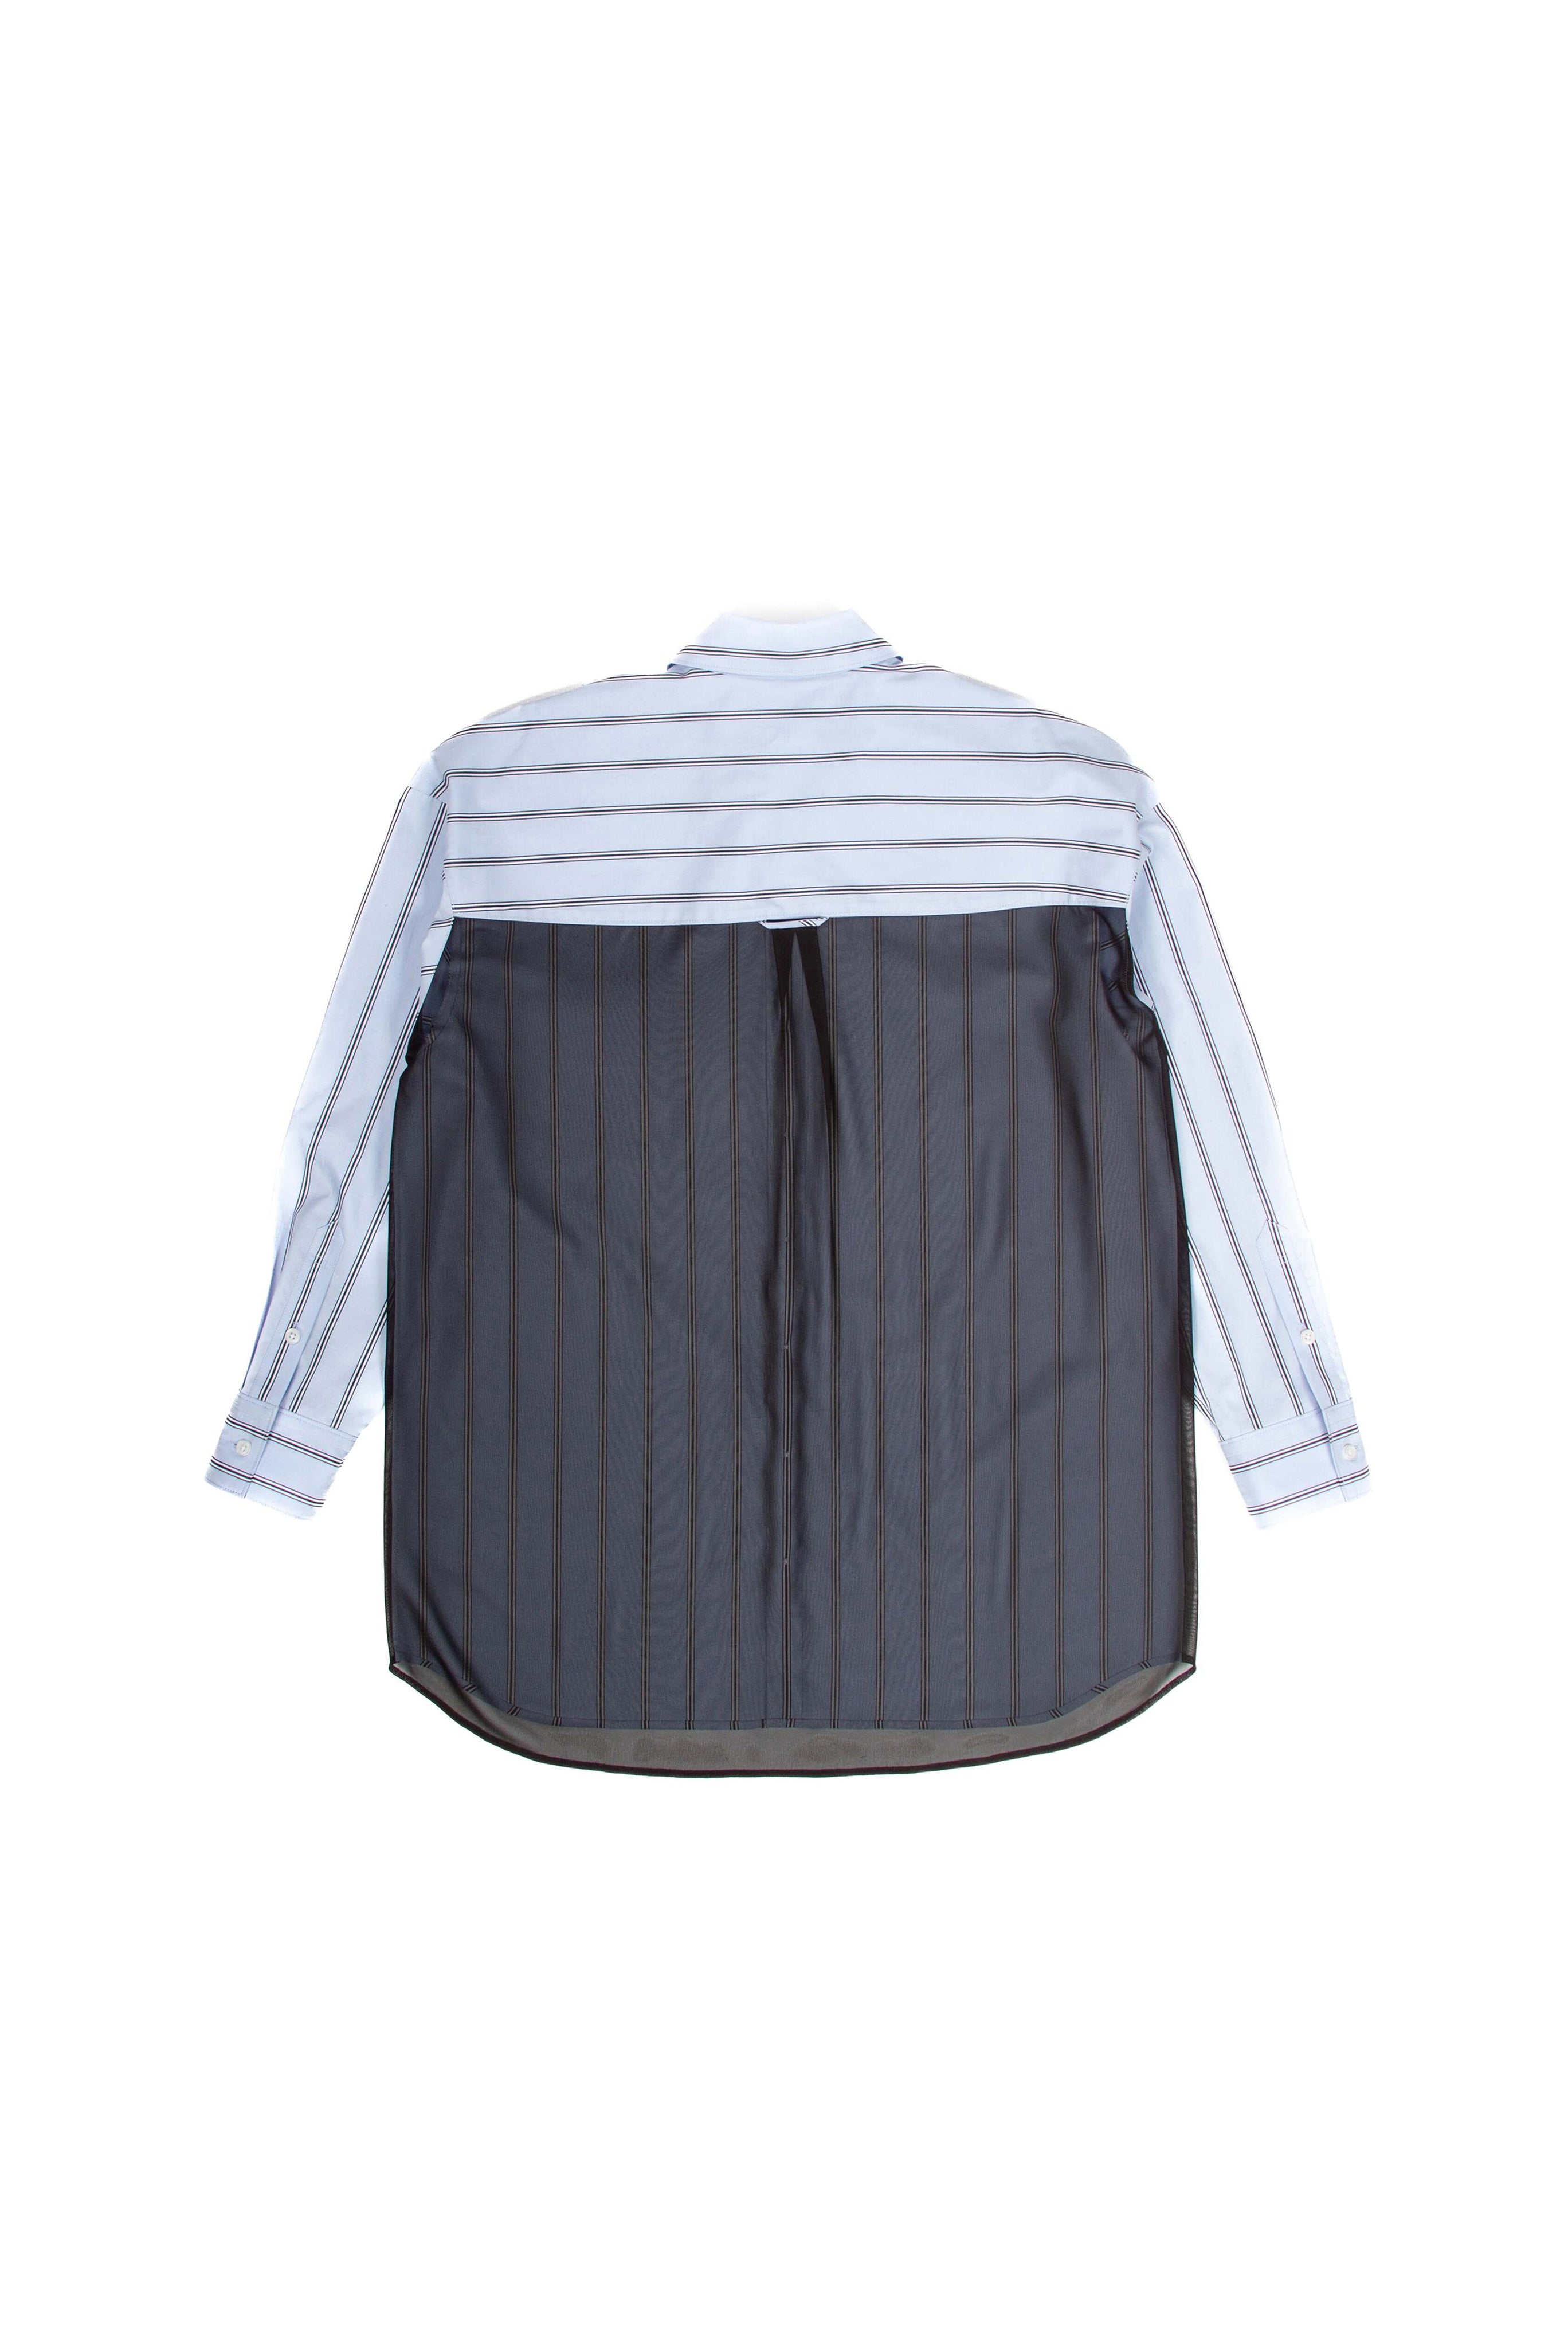 PUPPETS AND PUPPETS Cronenberg Oversized Striped Button Down Shirt